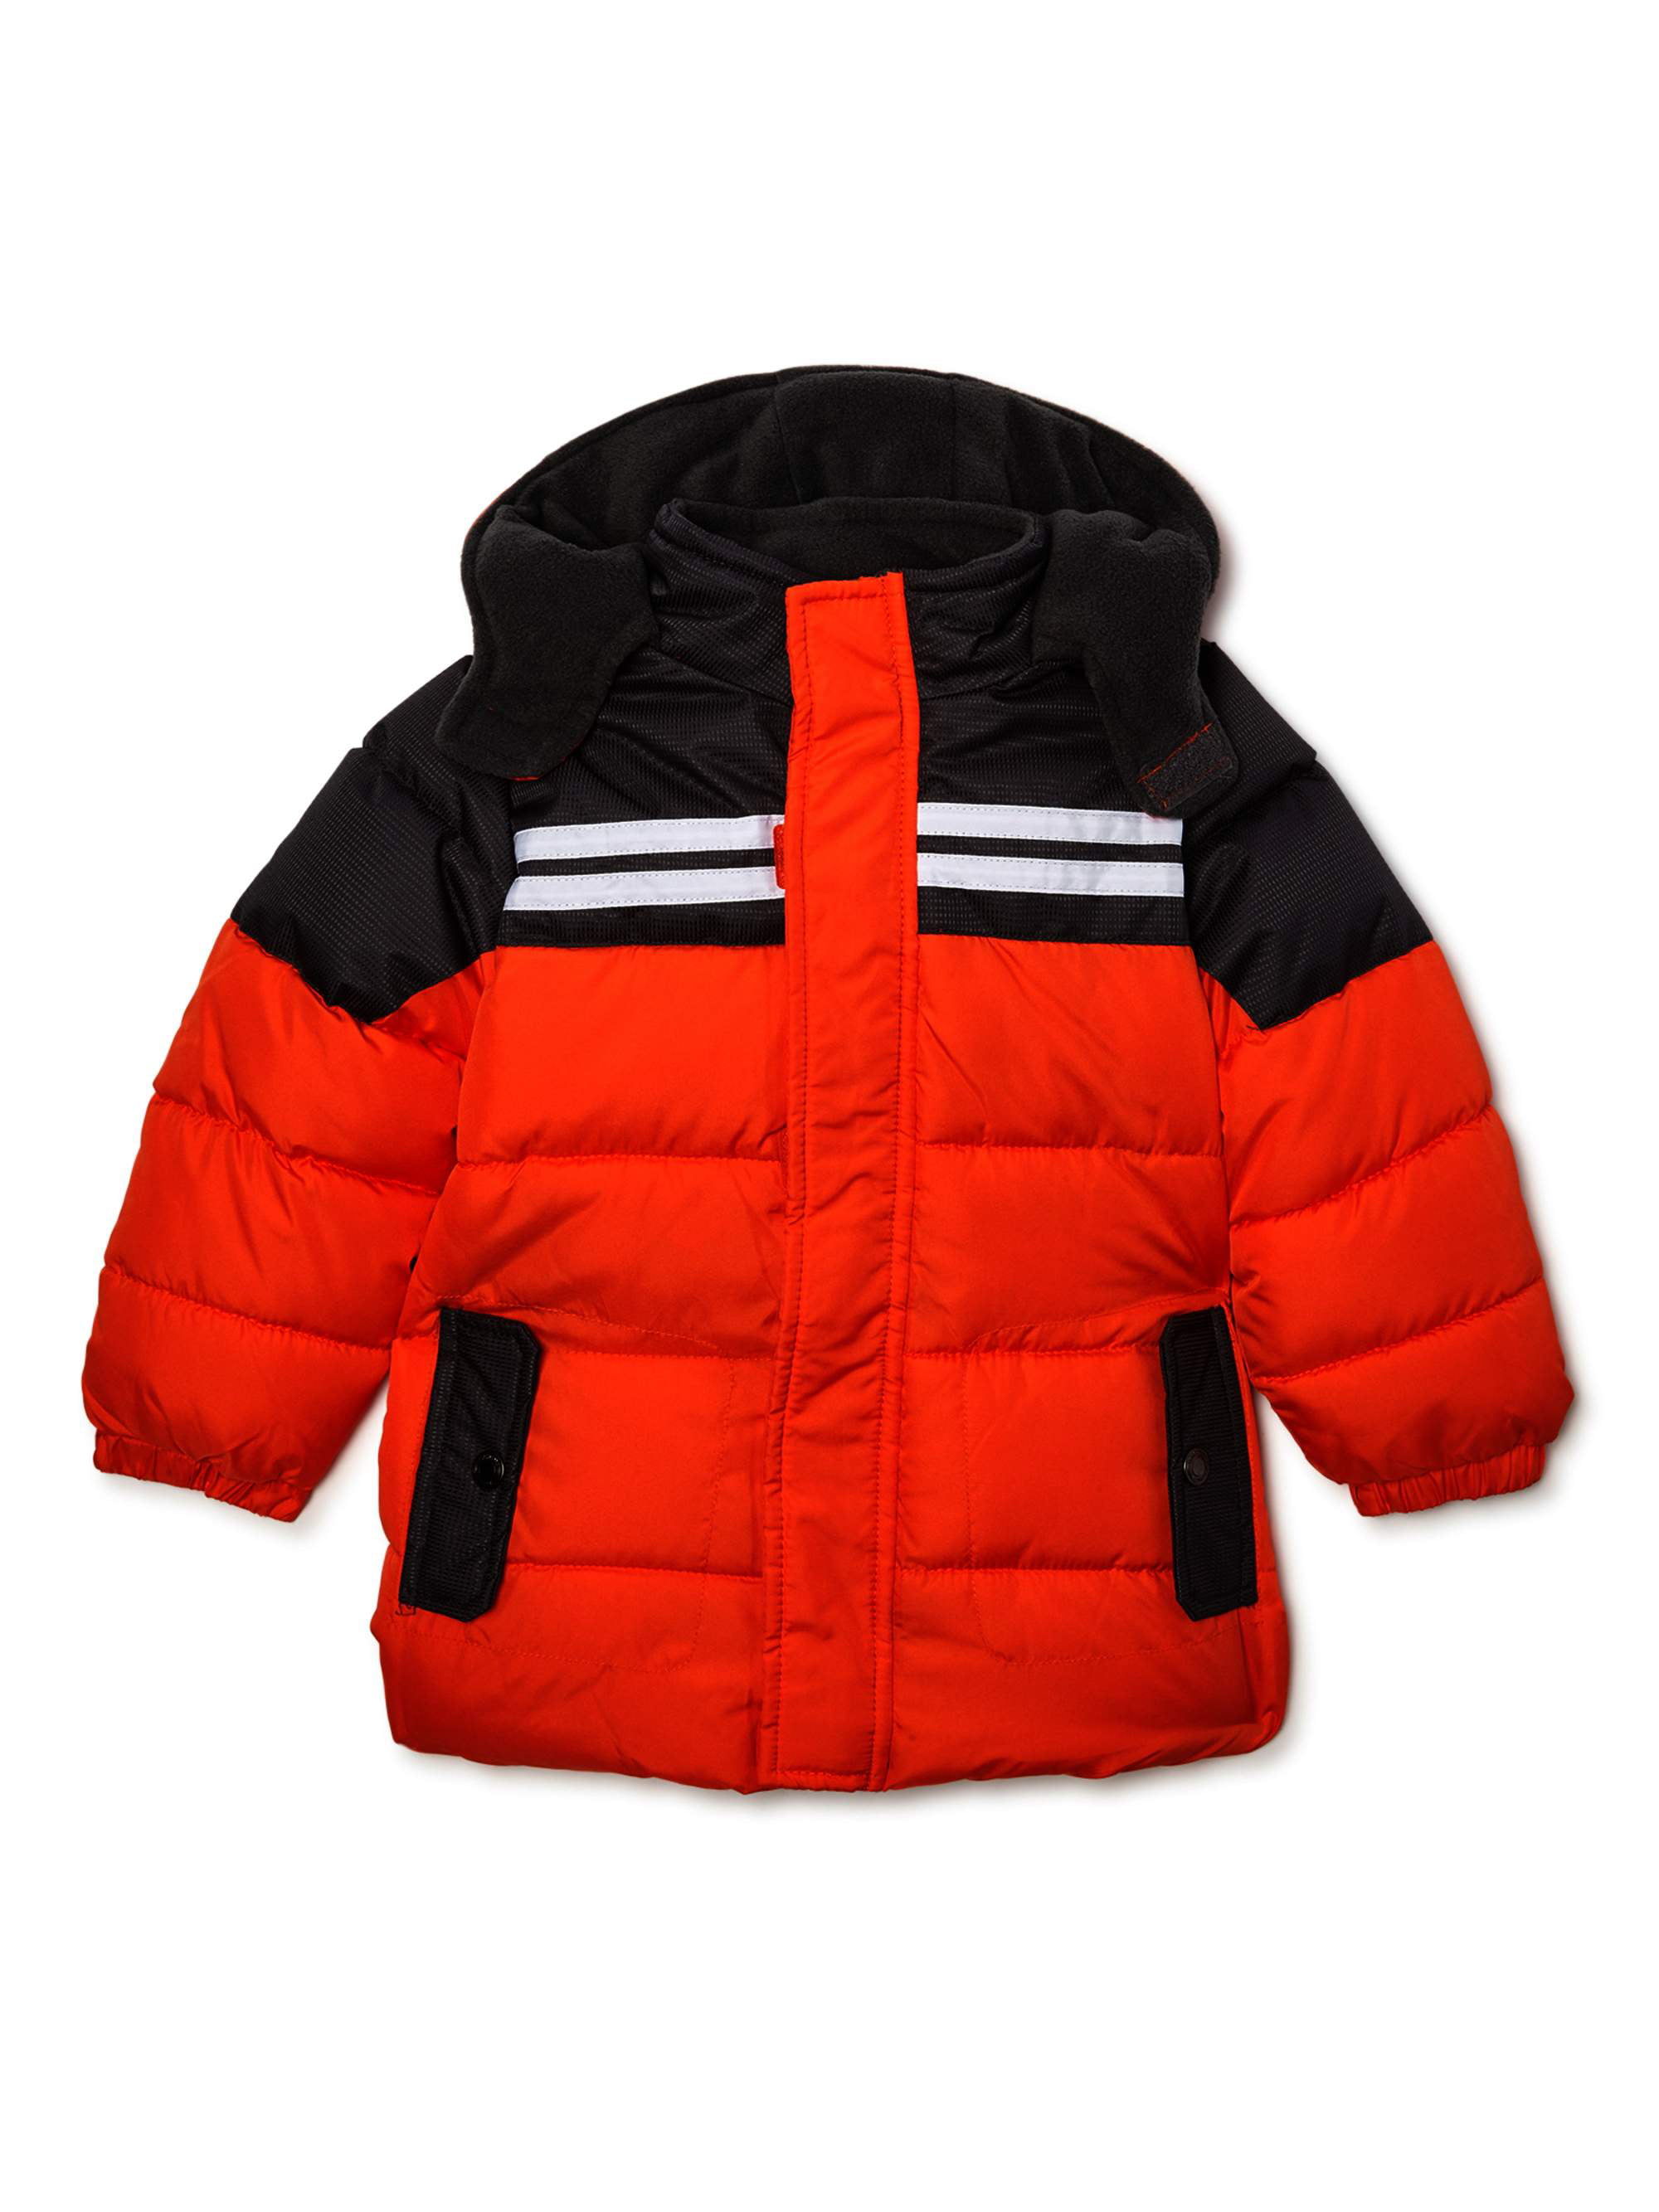 OLIVE iXtreme Toddler Boys' Colorblock Winter Snow Puffer Vest 